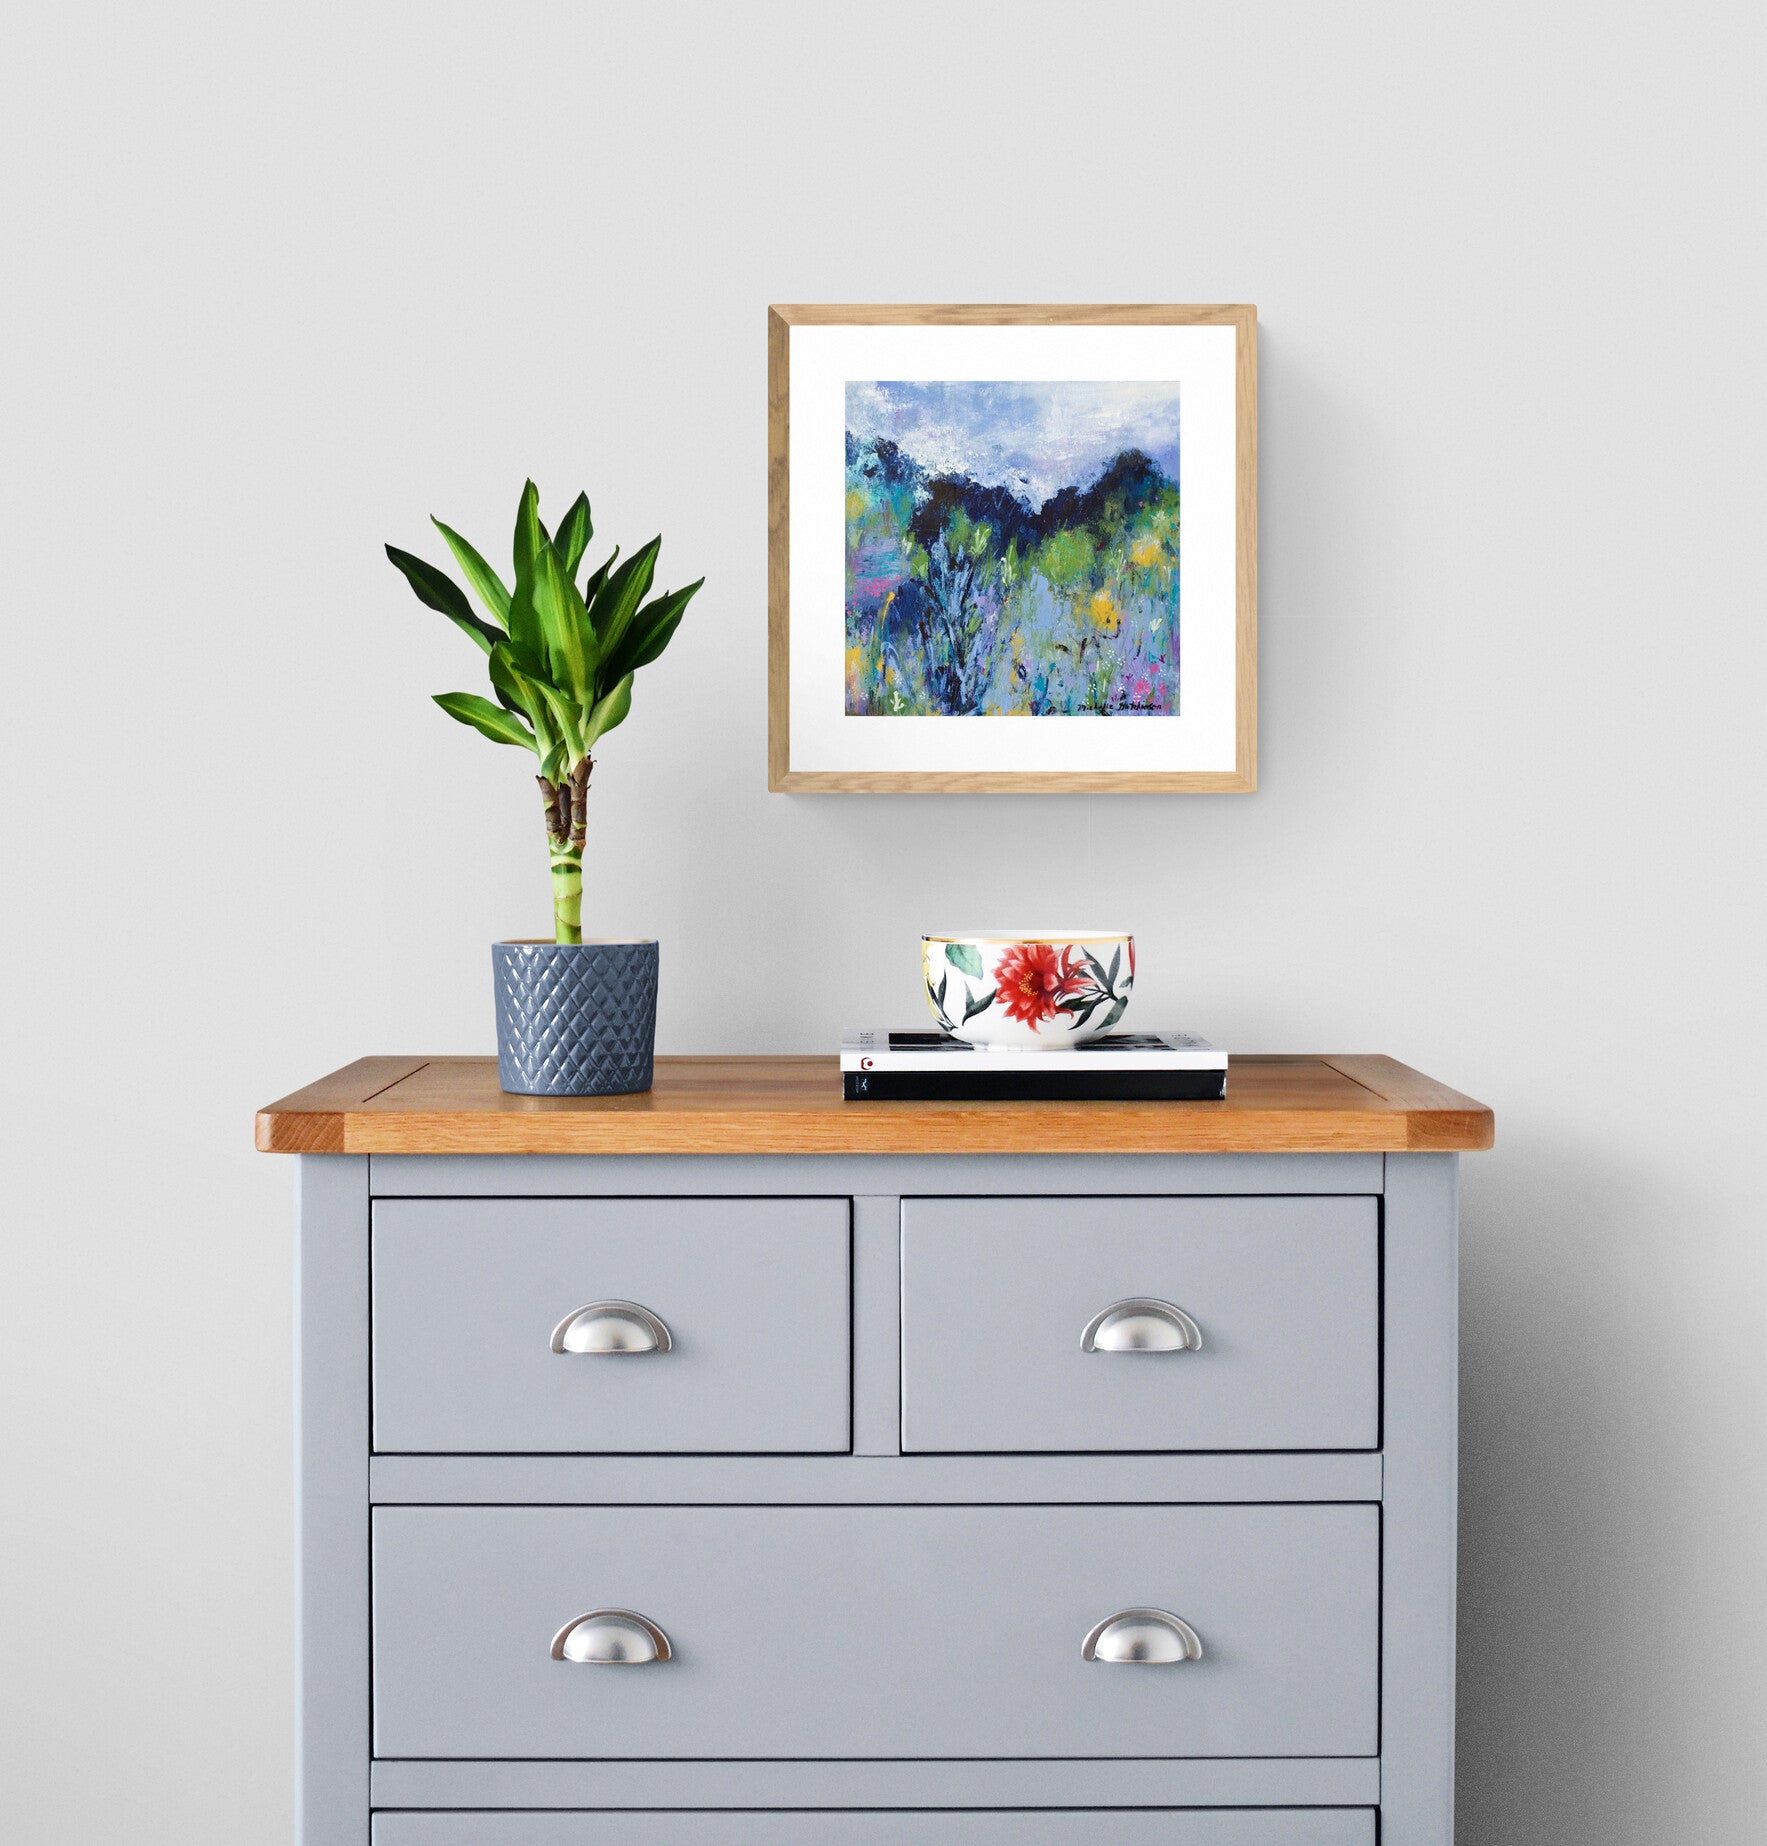 Inspired by a summer trip to the Canadian Rocky Mountains! Abstractly rendered meadow flowers of yellows and pinks and trees in greens draw the viewer's eye to the sky. New Vistas Await beckons us to absorb all the natural beauty around us and be inspired to try something new.